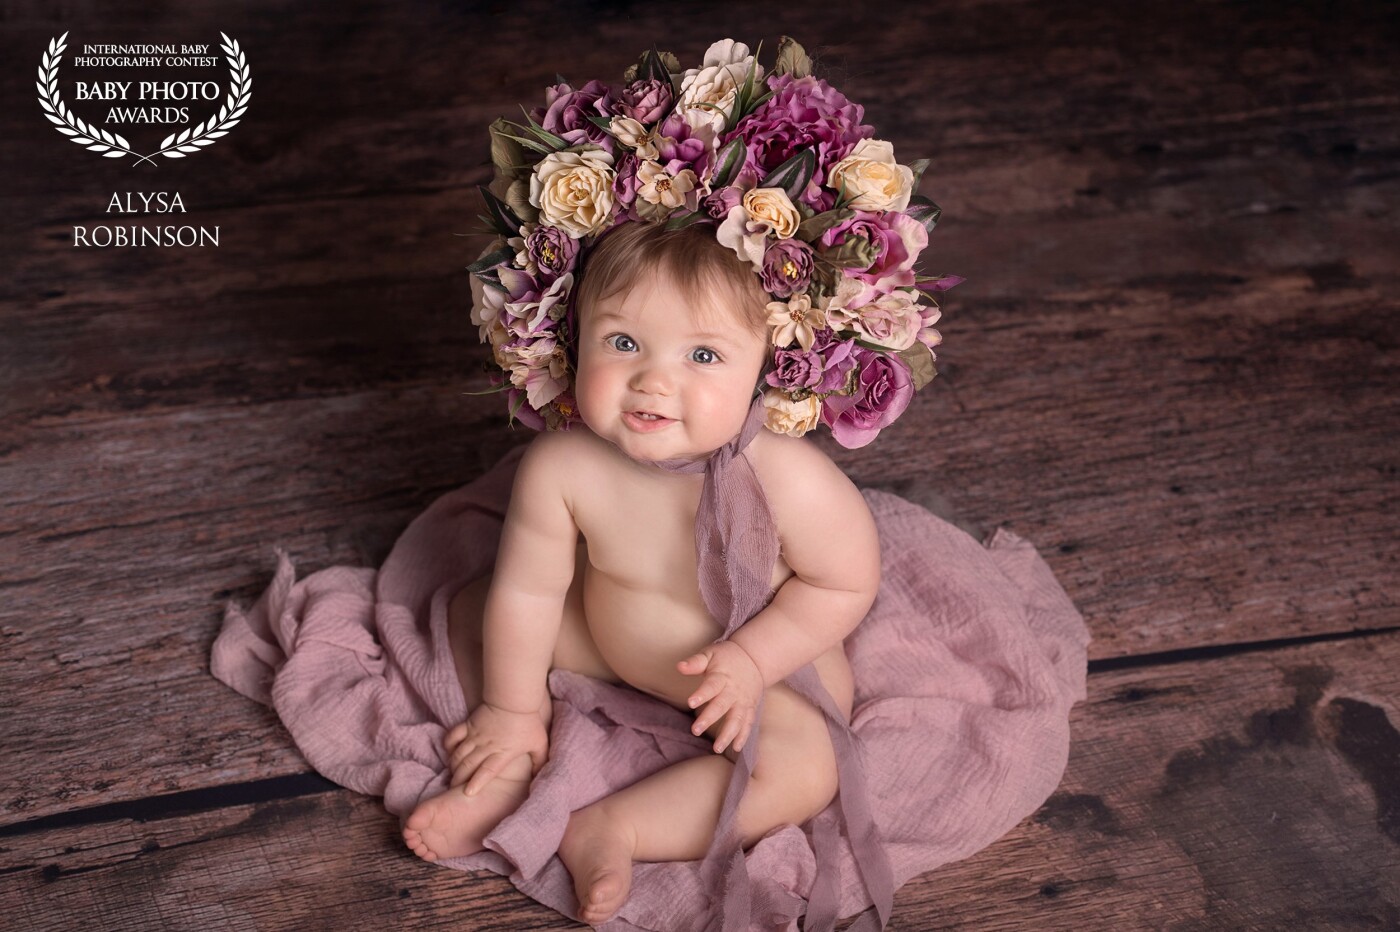 Baby grace, I love taking photos of 6-8-month-olds. Their adorable rolls and big smiles just make the session so lovable and fun. 